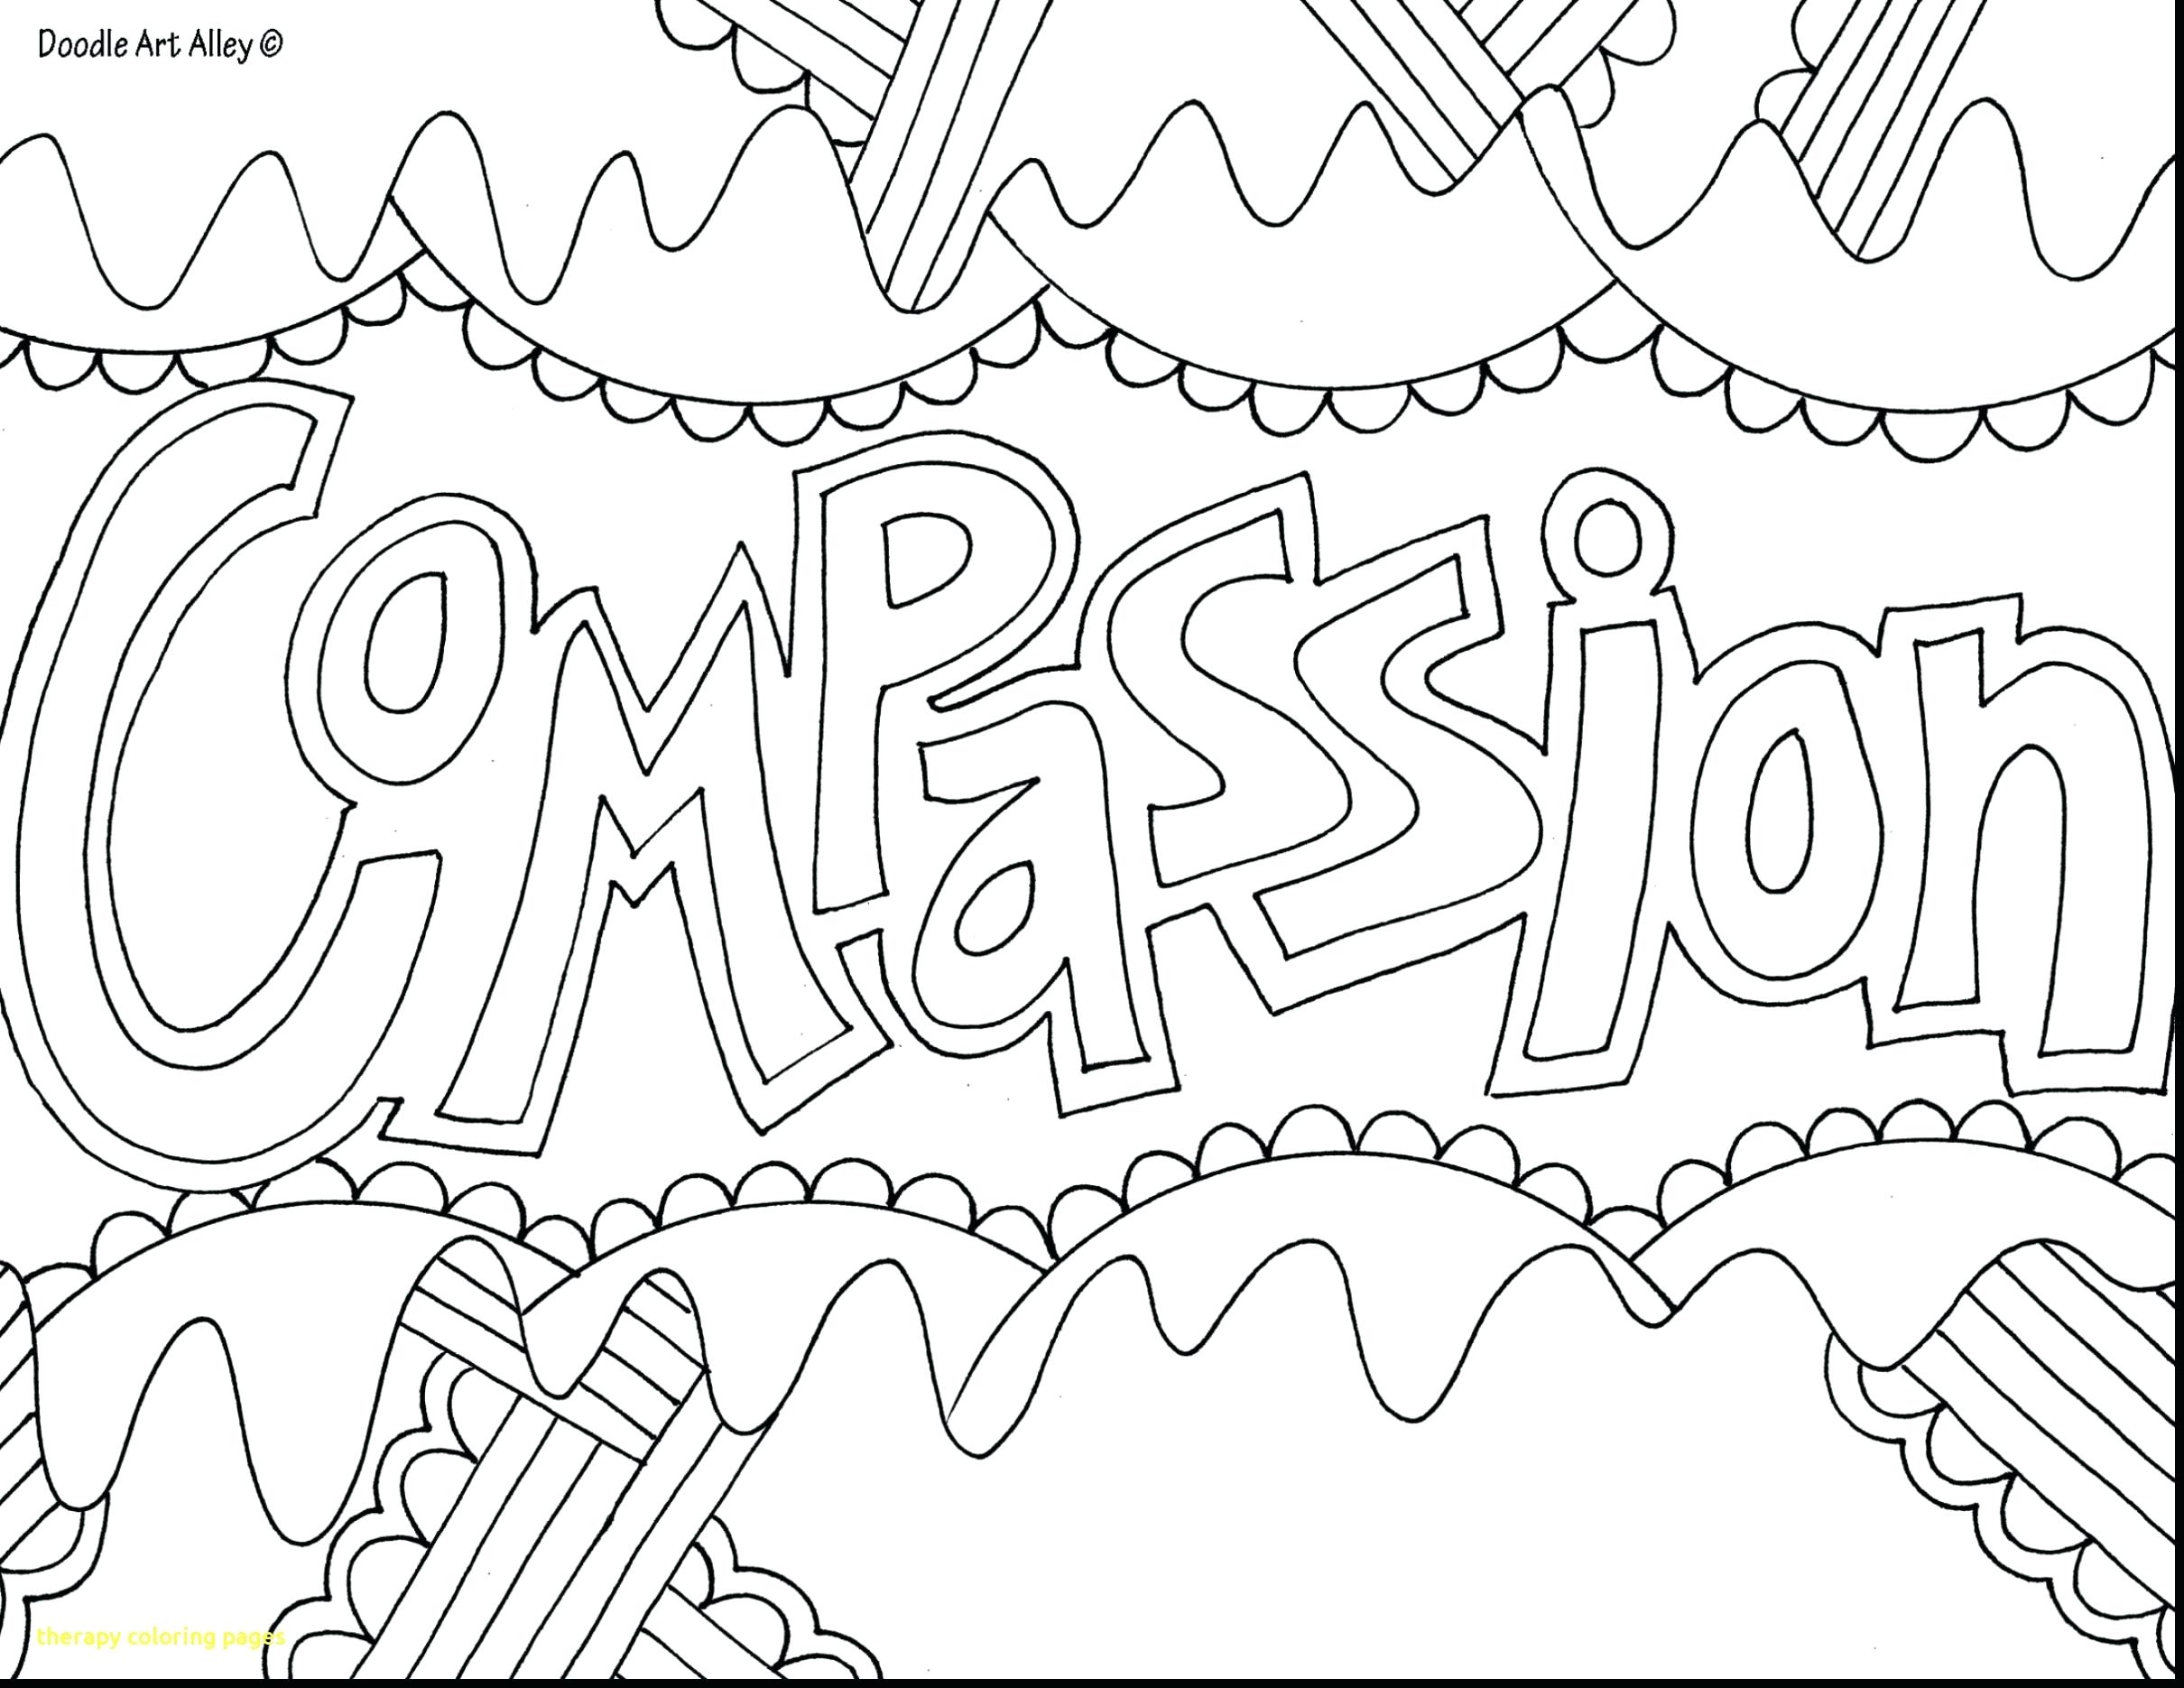 empathy-coloring-sheets-coloring-pages